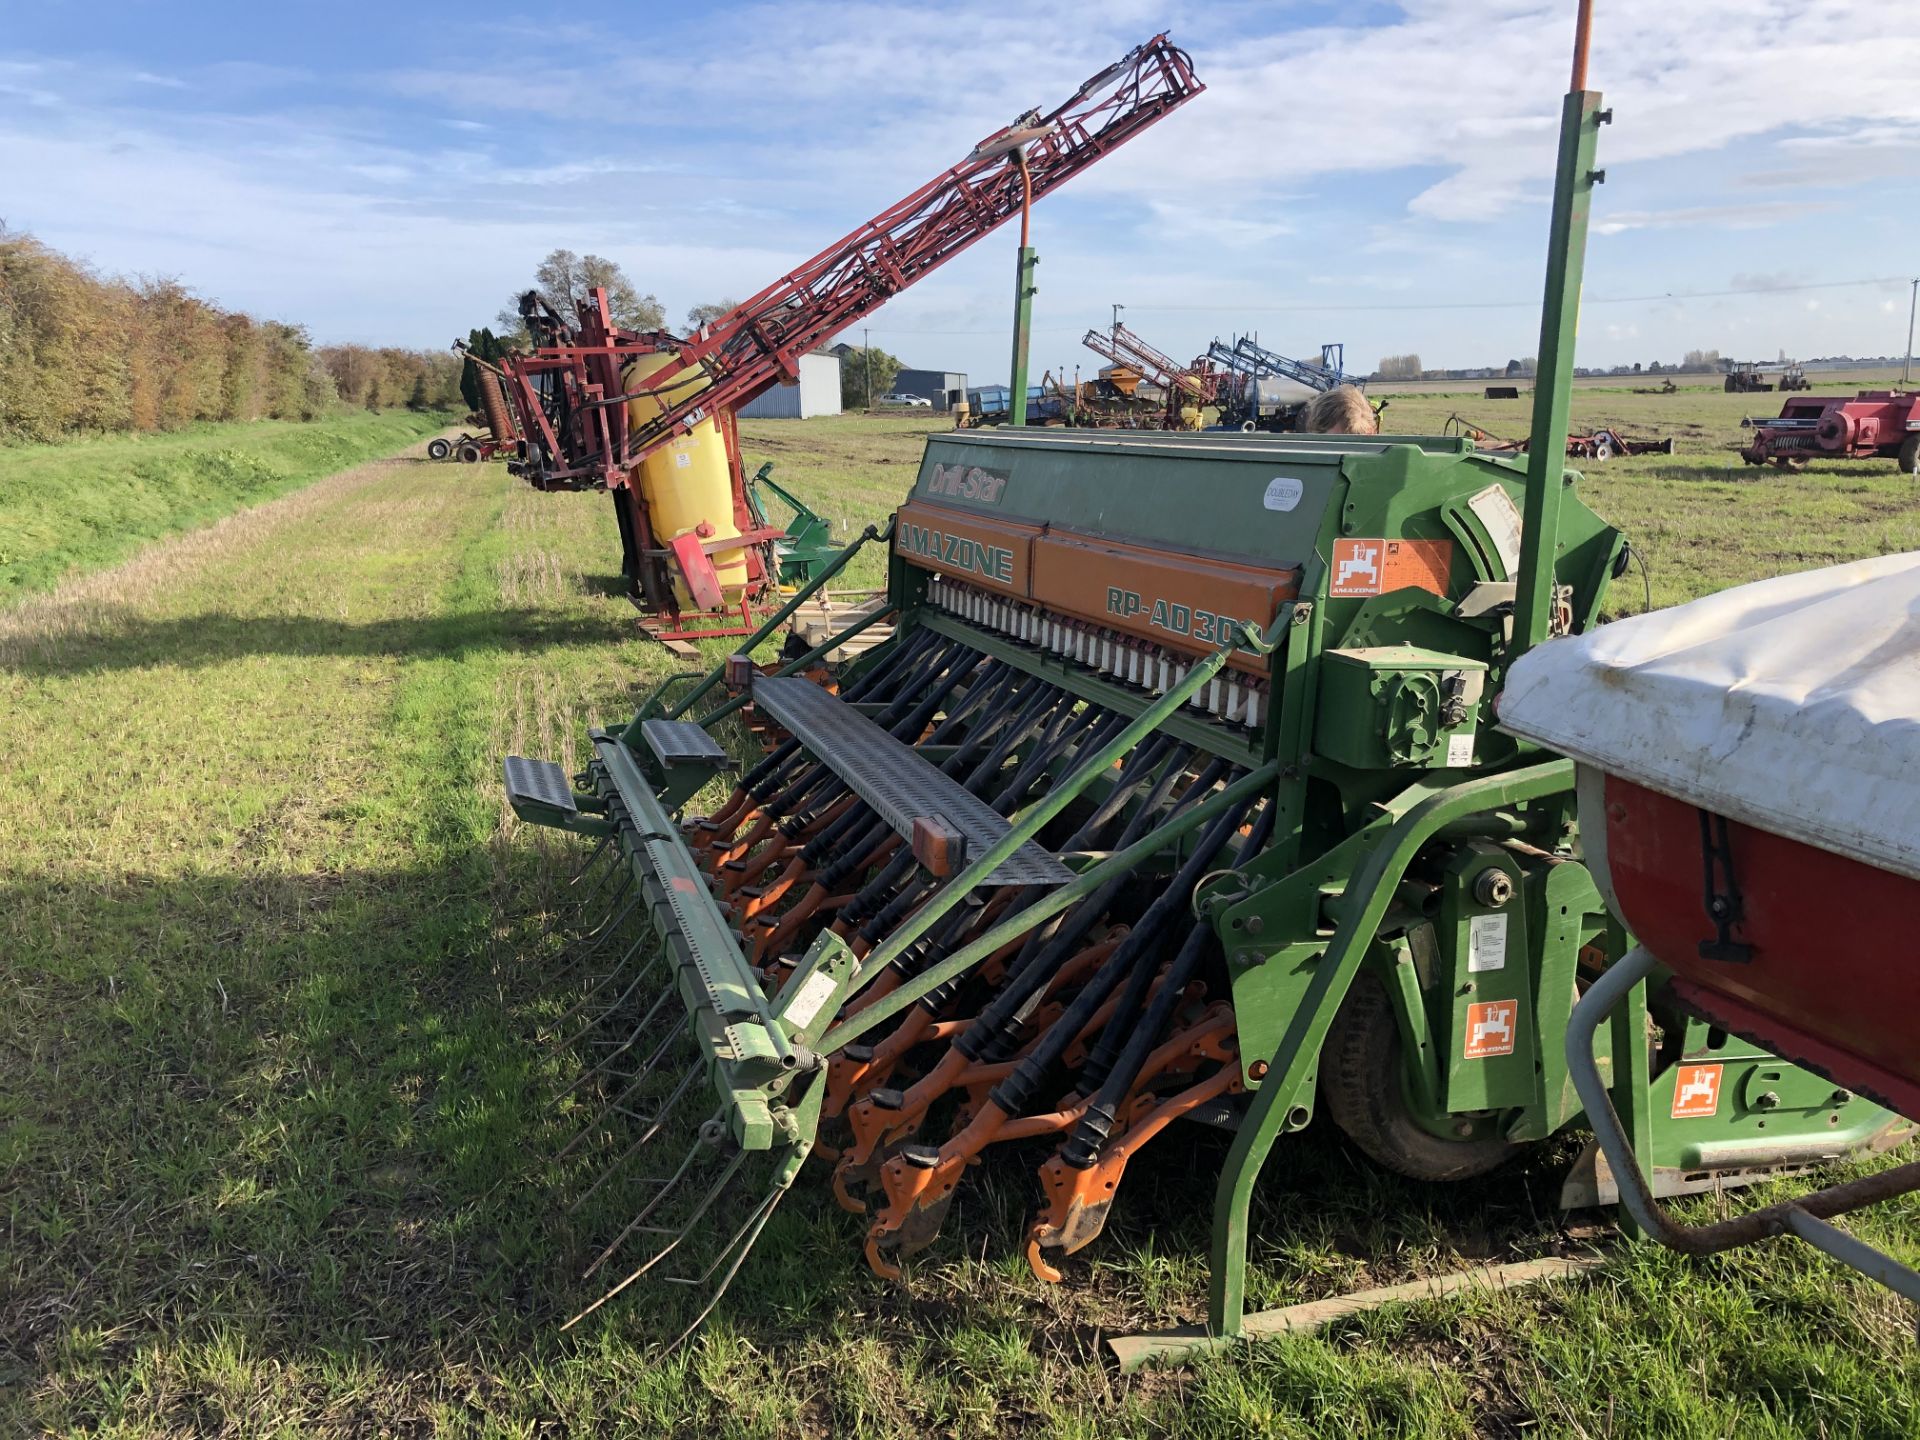 AMAZONE COMBI DRILL, RP AD 302, DRILL STAR, POWER HARROW, SUFFOLK COULTER. - Image 10 of 12